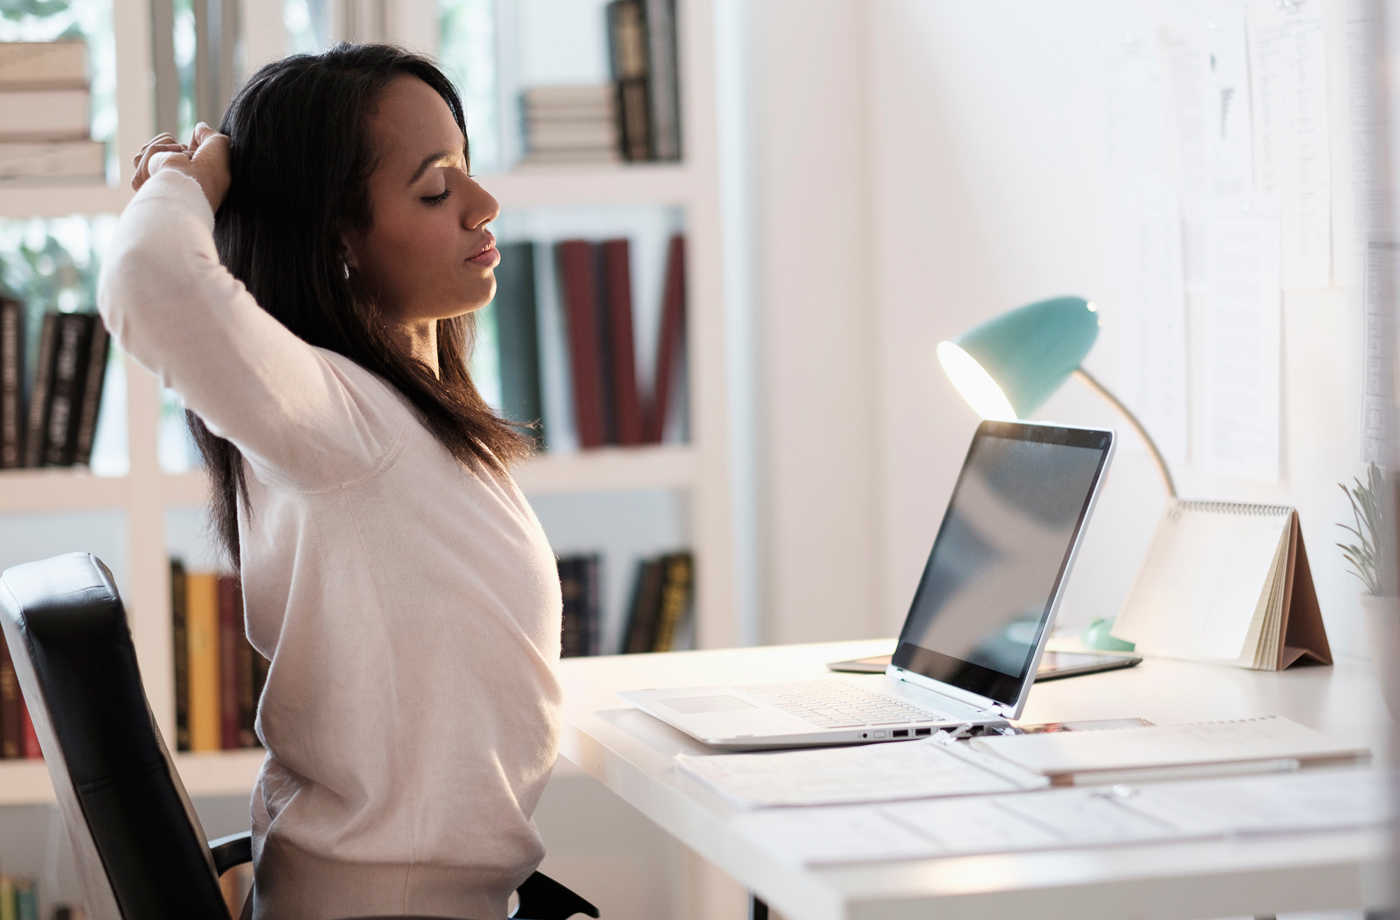 Ever heard of desk yoga? It can help your back